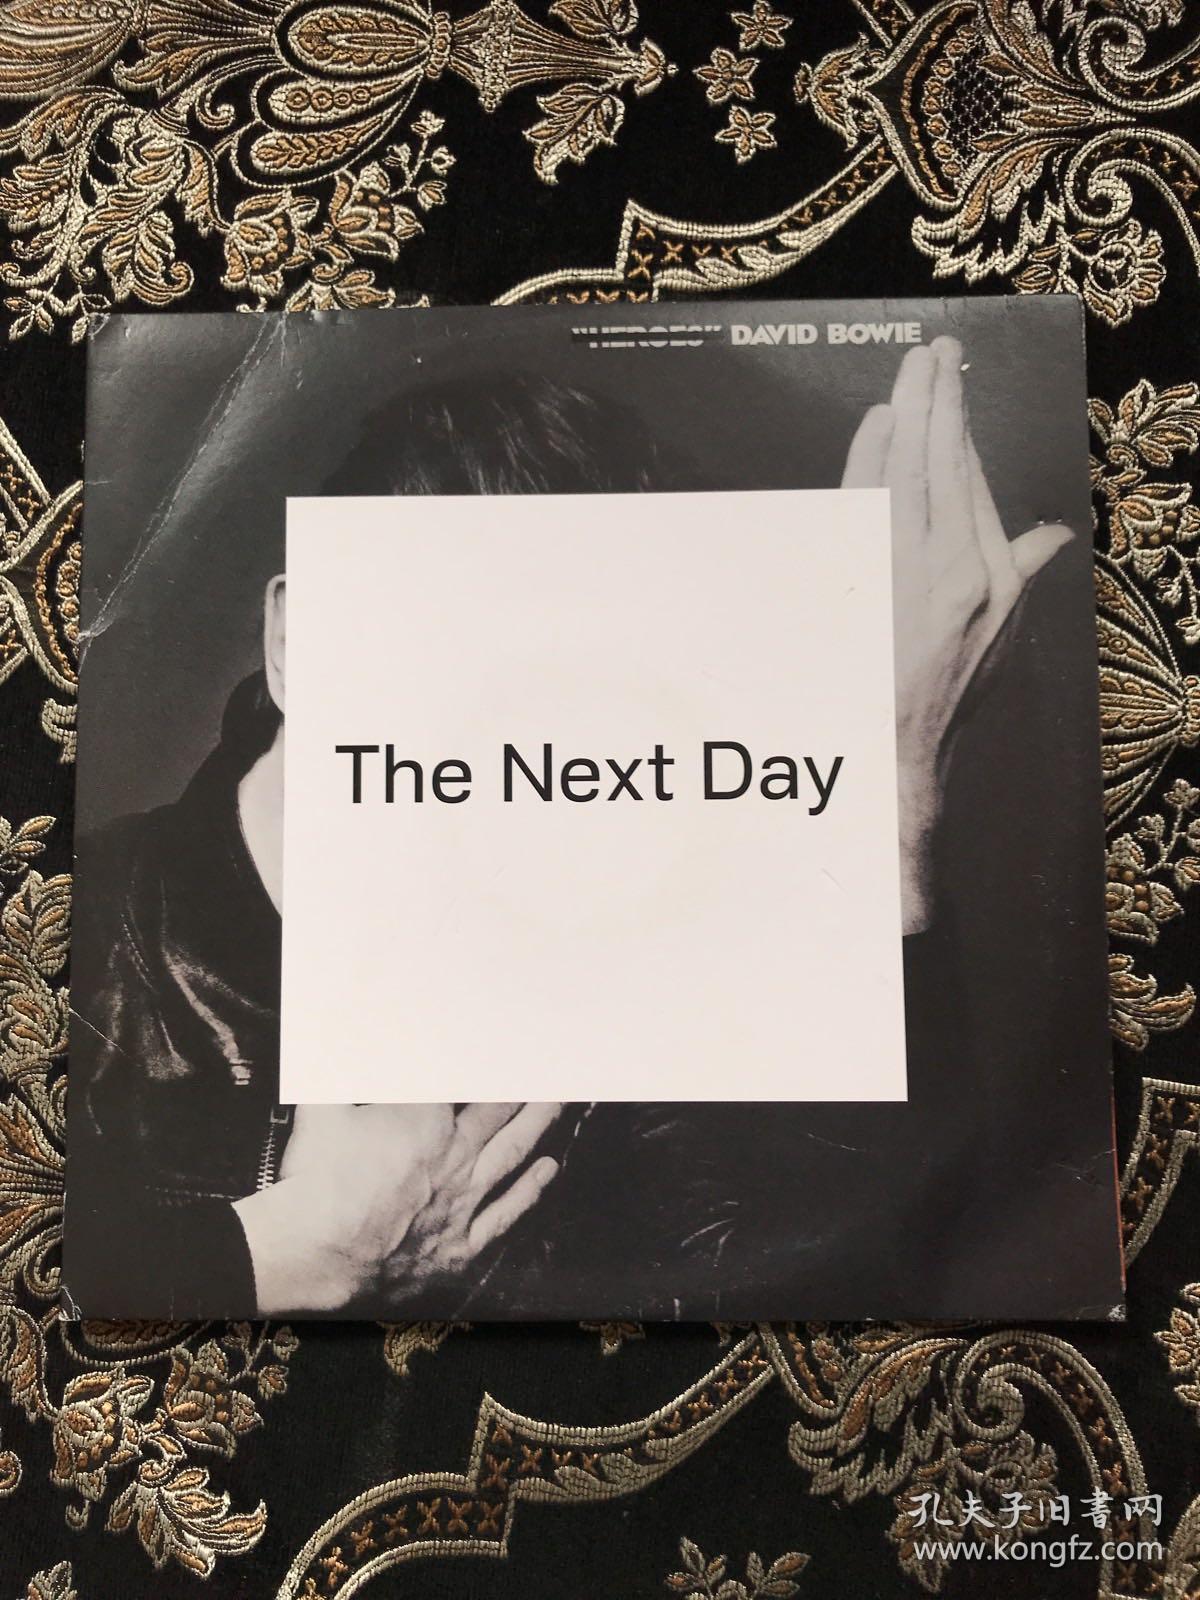 The Next Day 唱片